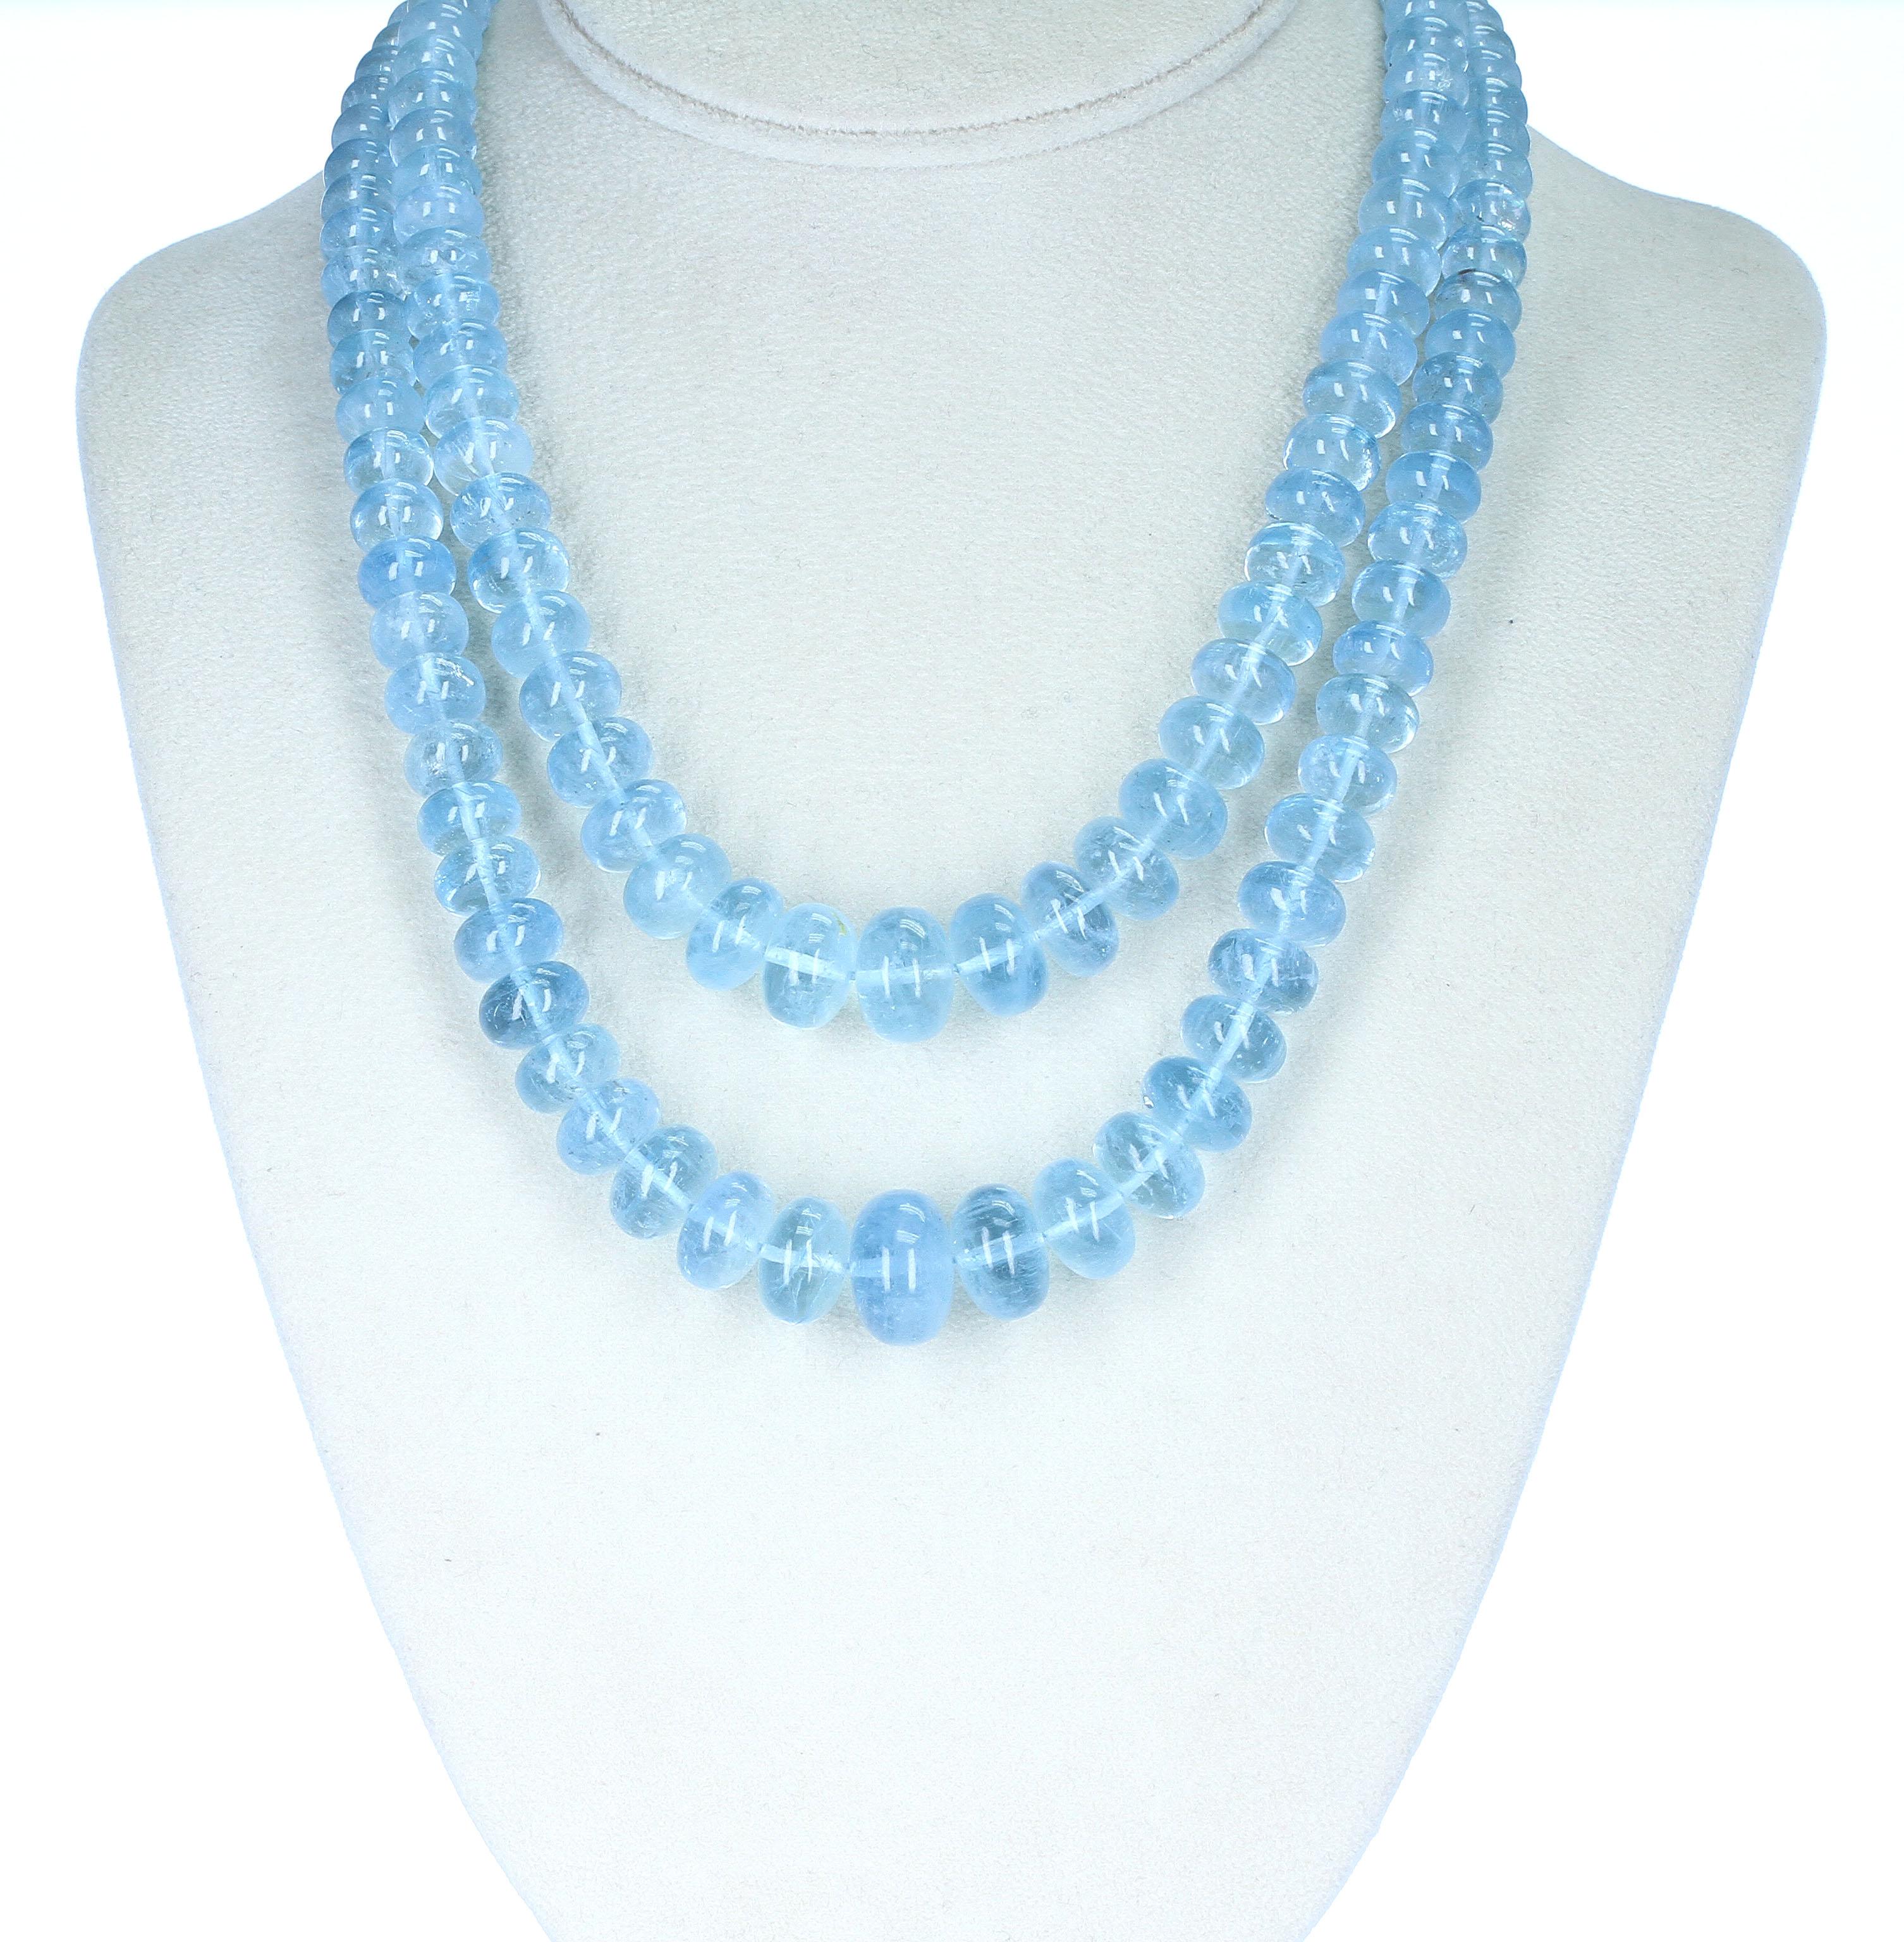 Two strands of genuine and large smooth Aquamarine Beads, one strand is 17